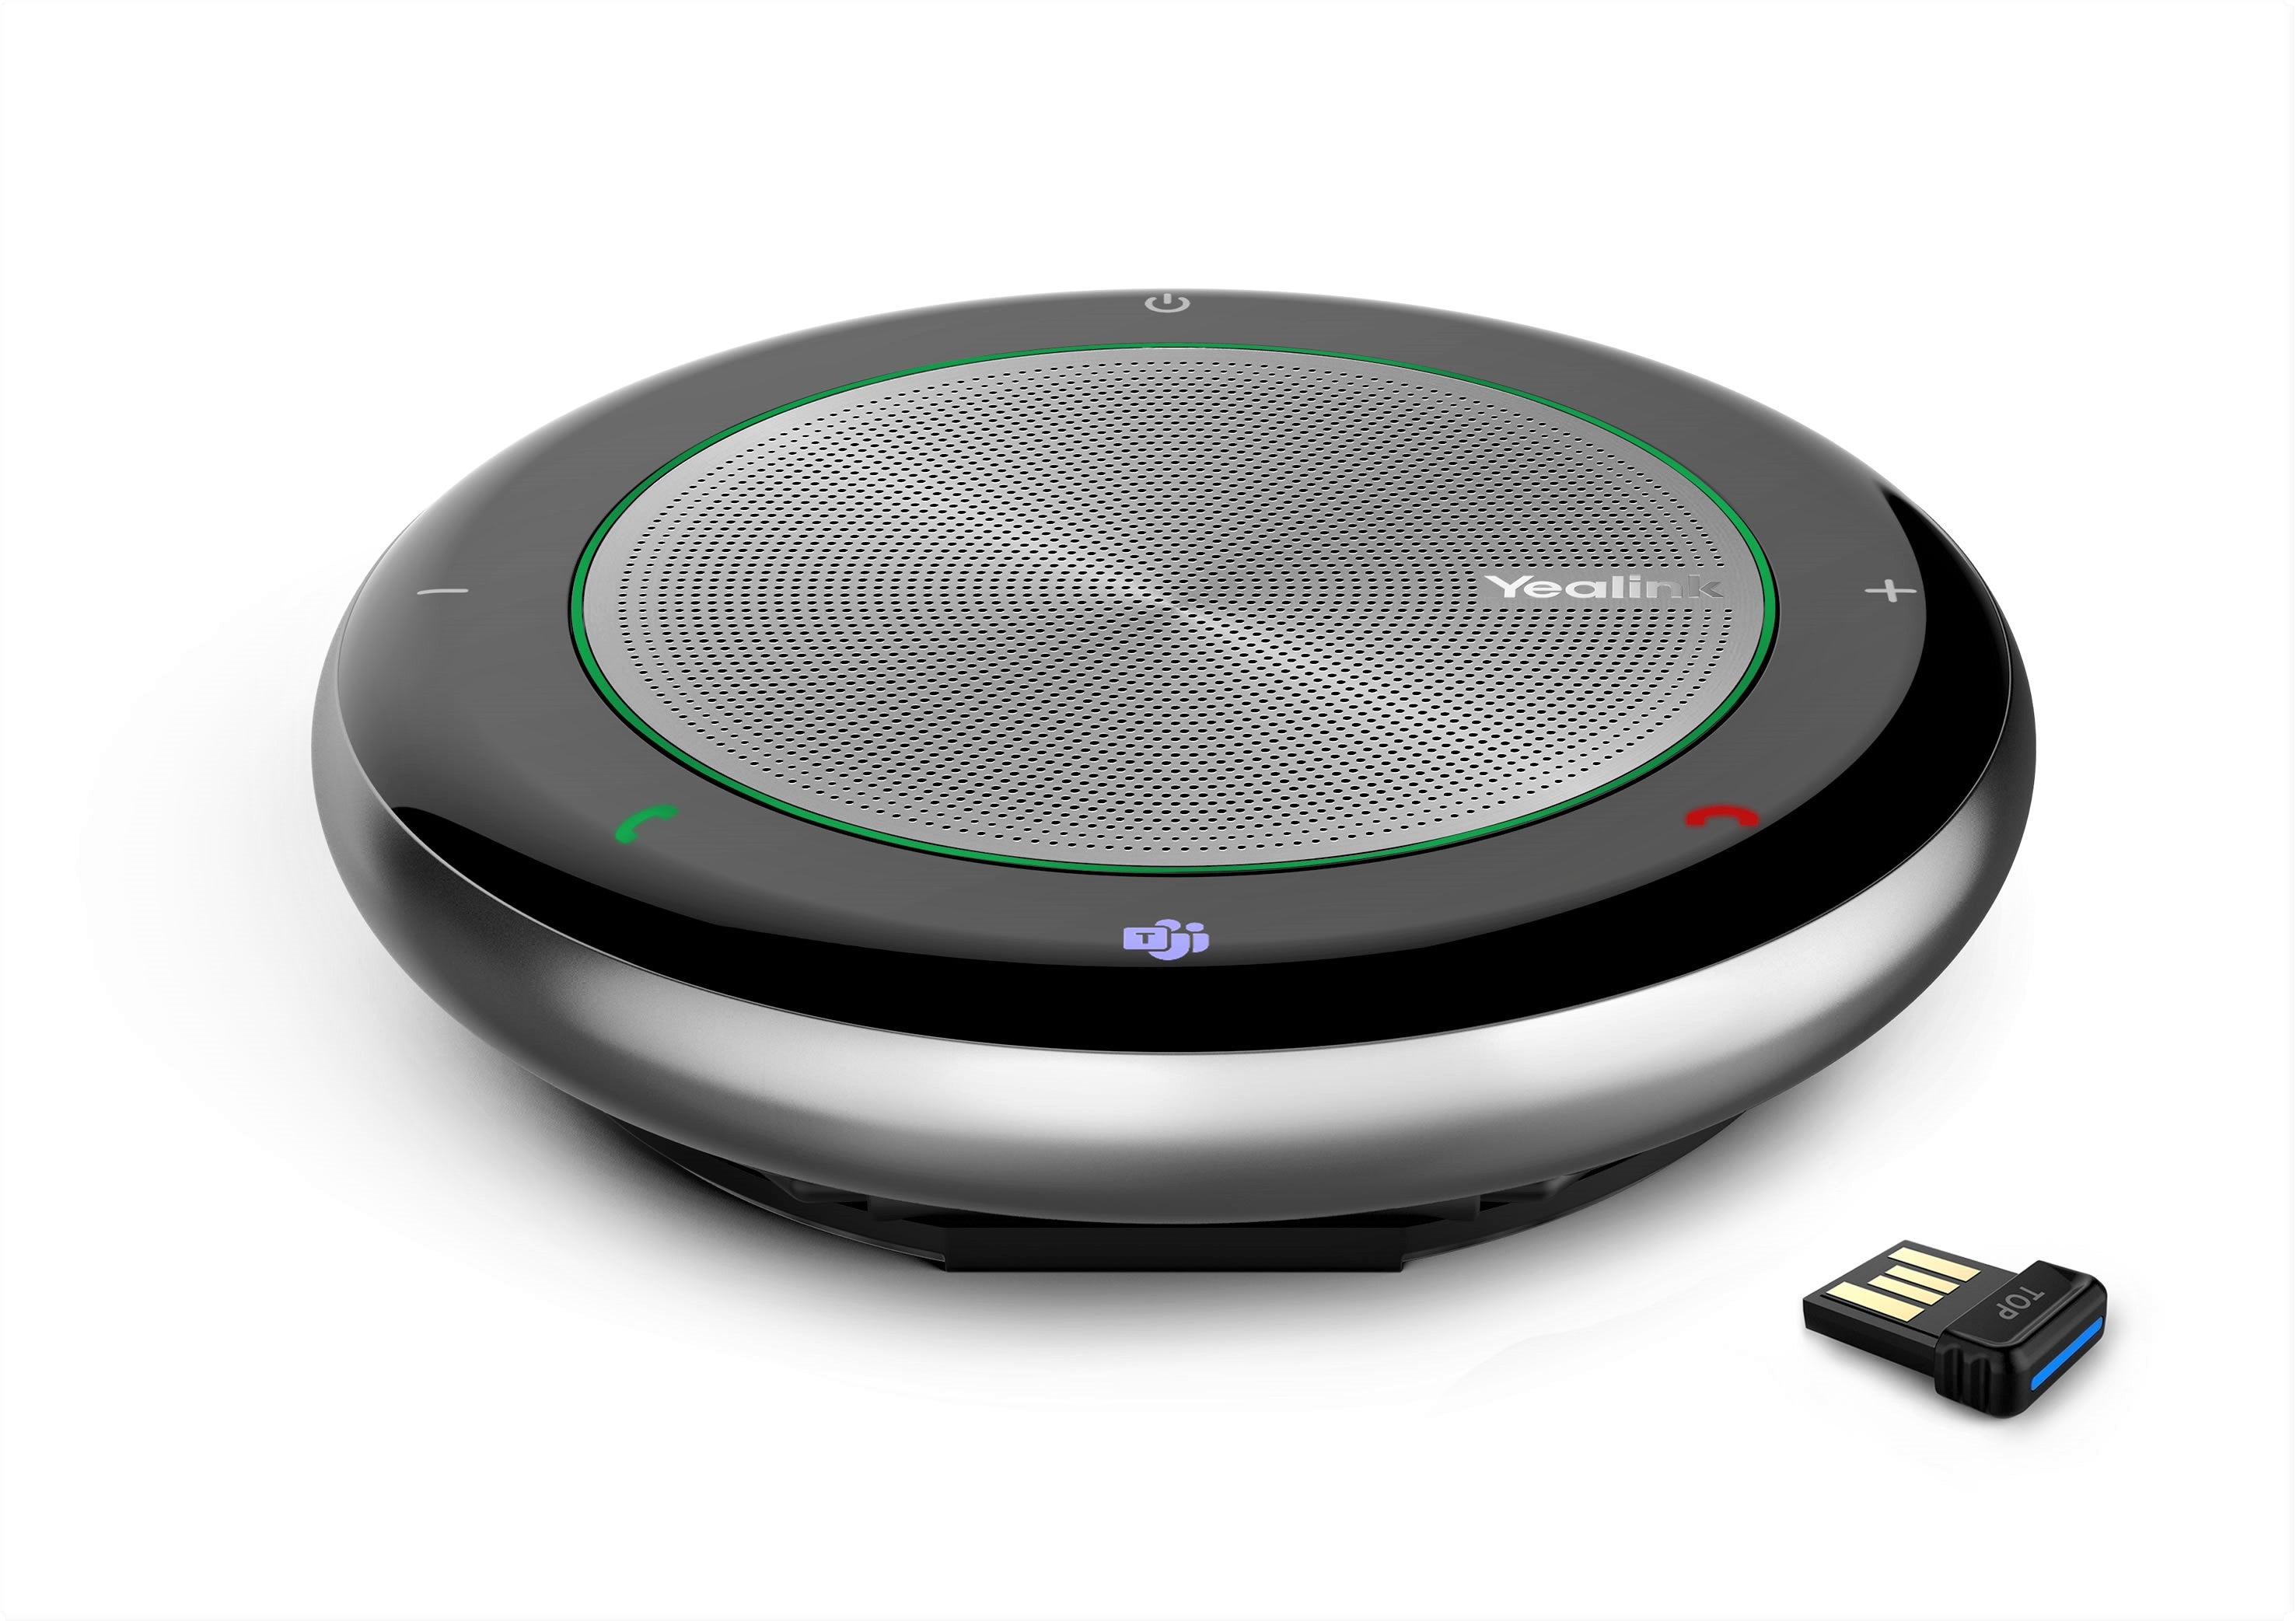 Yealink CP700-BT50 - Ultra-Compact Portable Speakerphone with USB and Bluetooth connectivity - with BT50 dongle